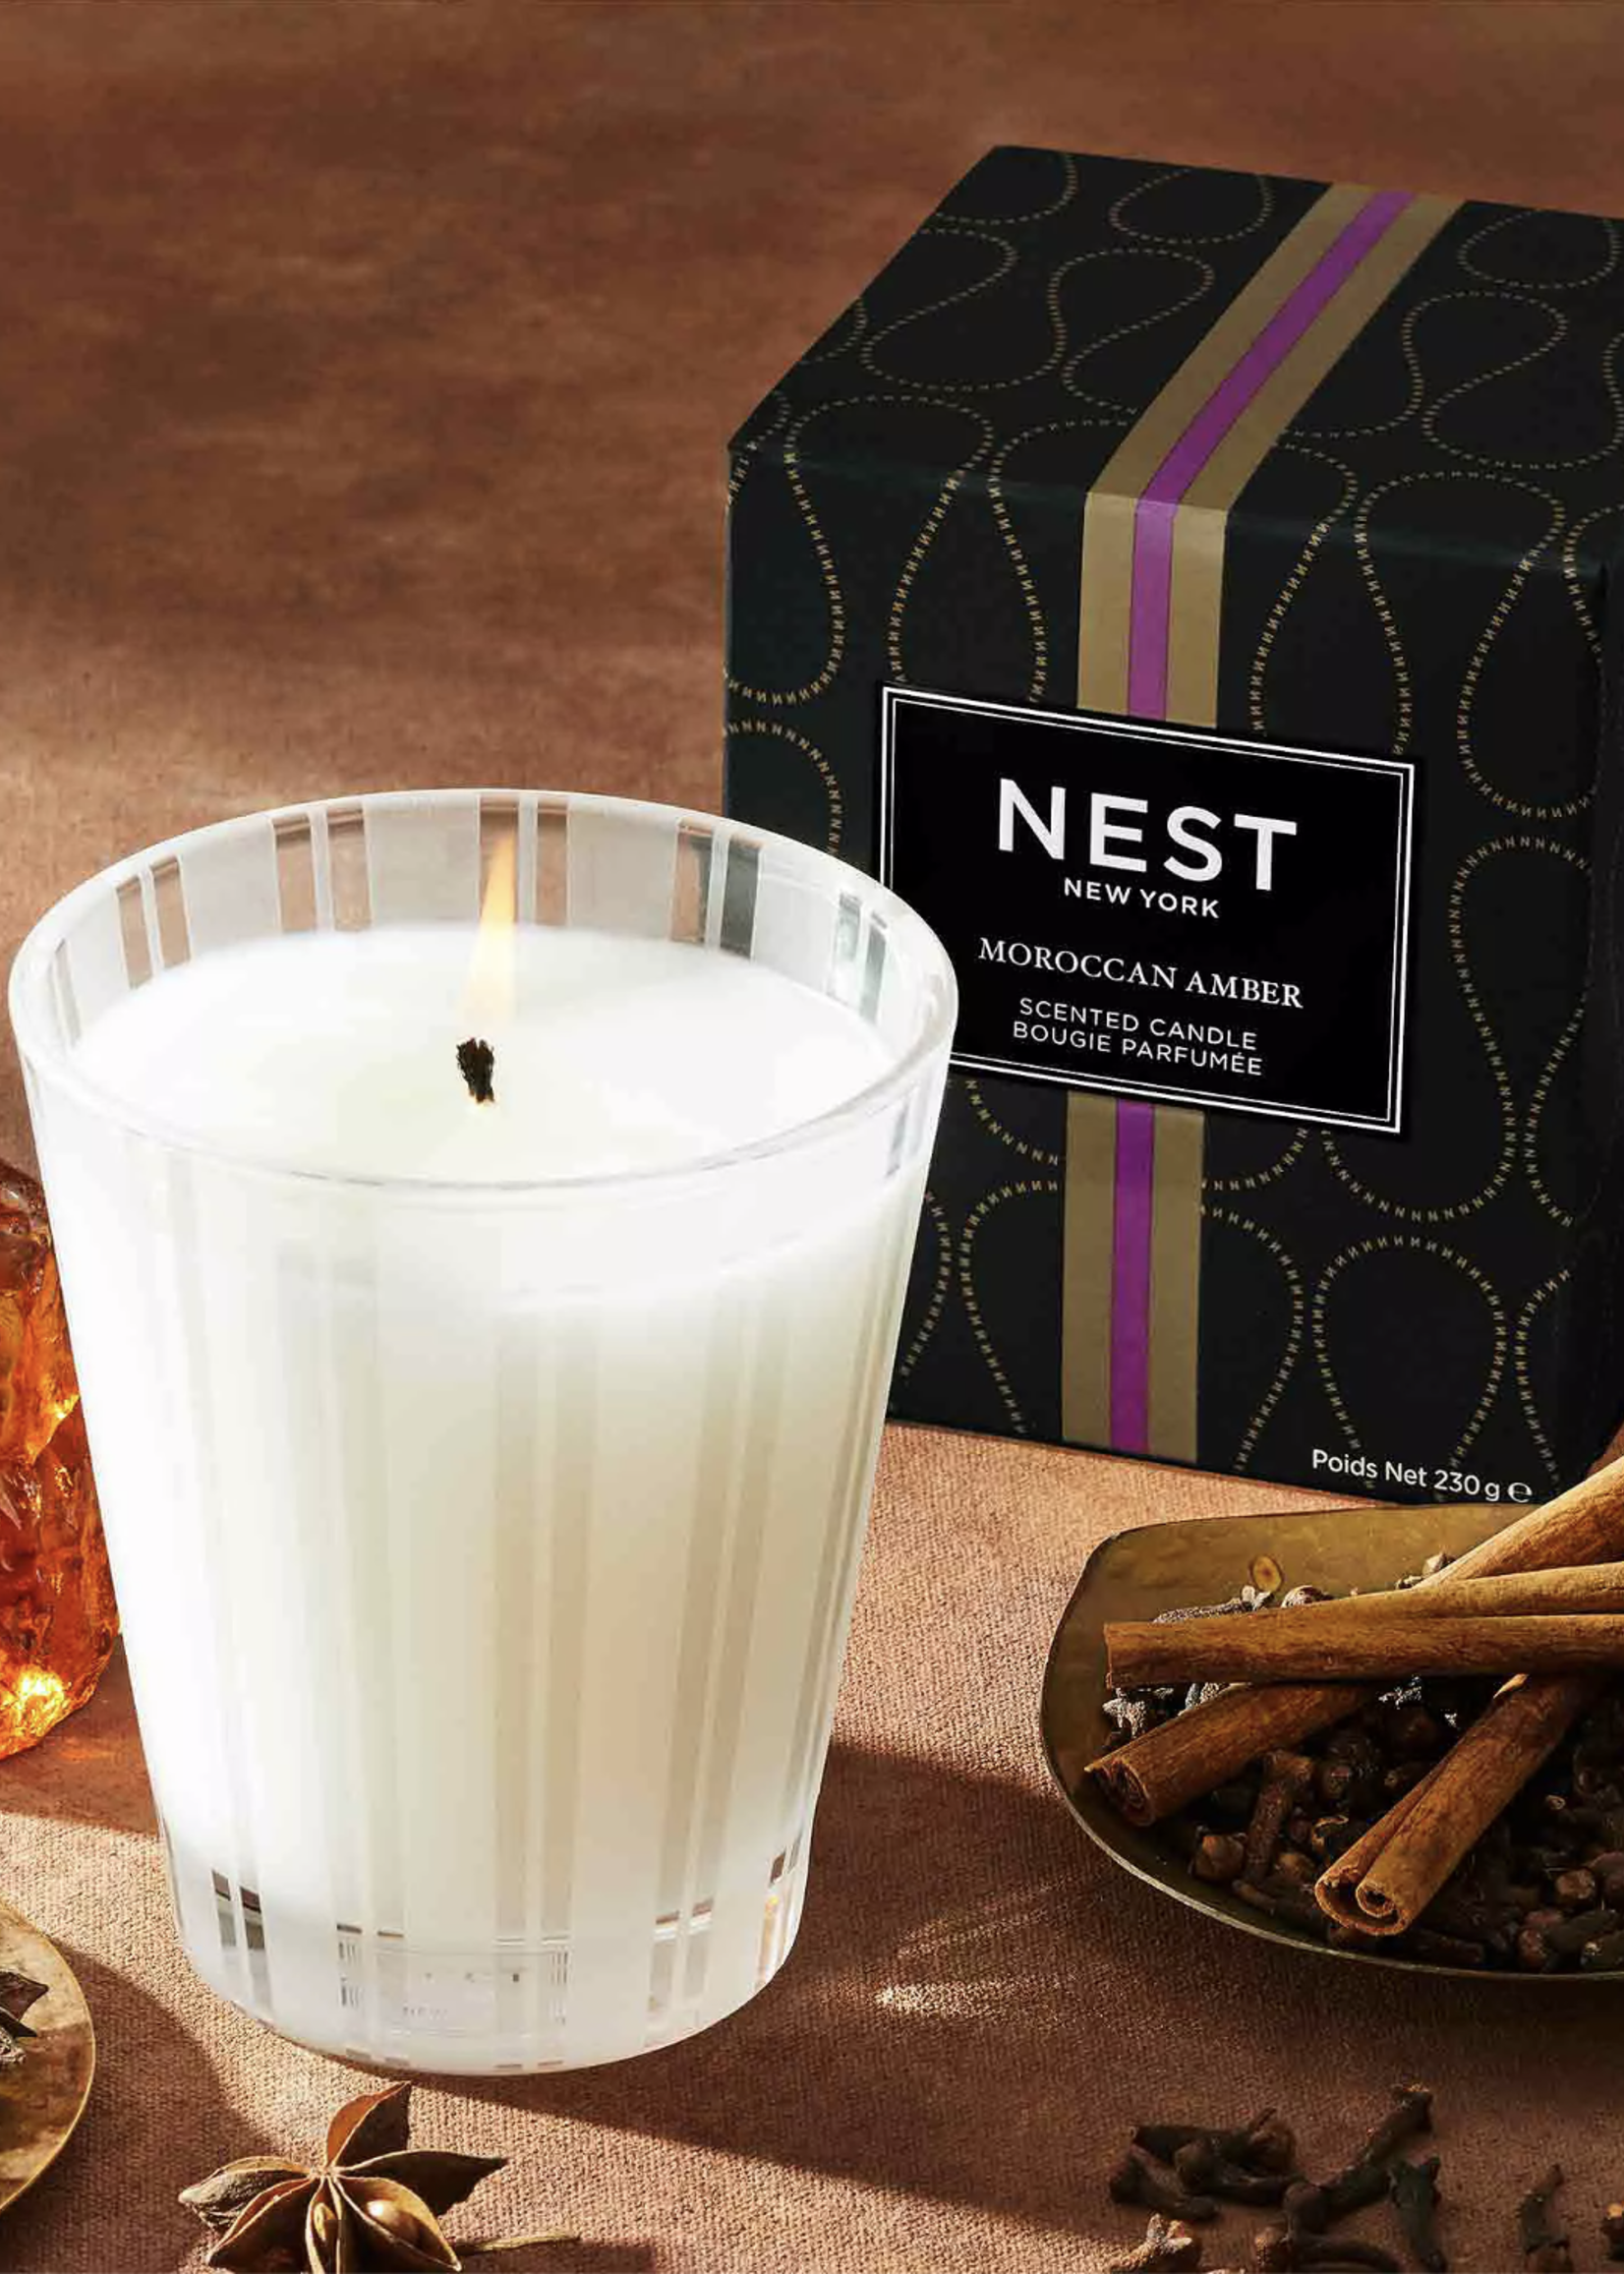 Nest- Moroccan Amber Scented Candle 8.1oz